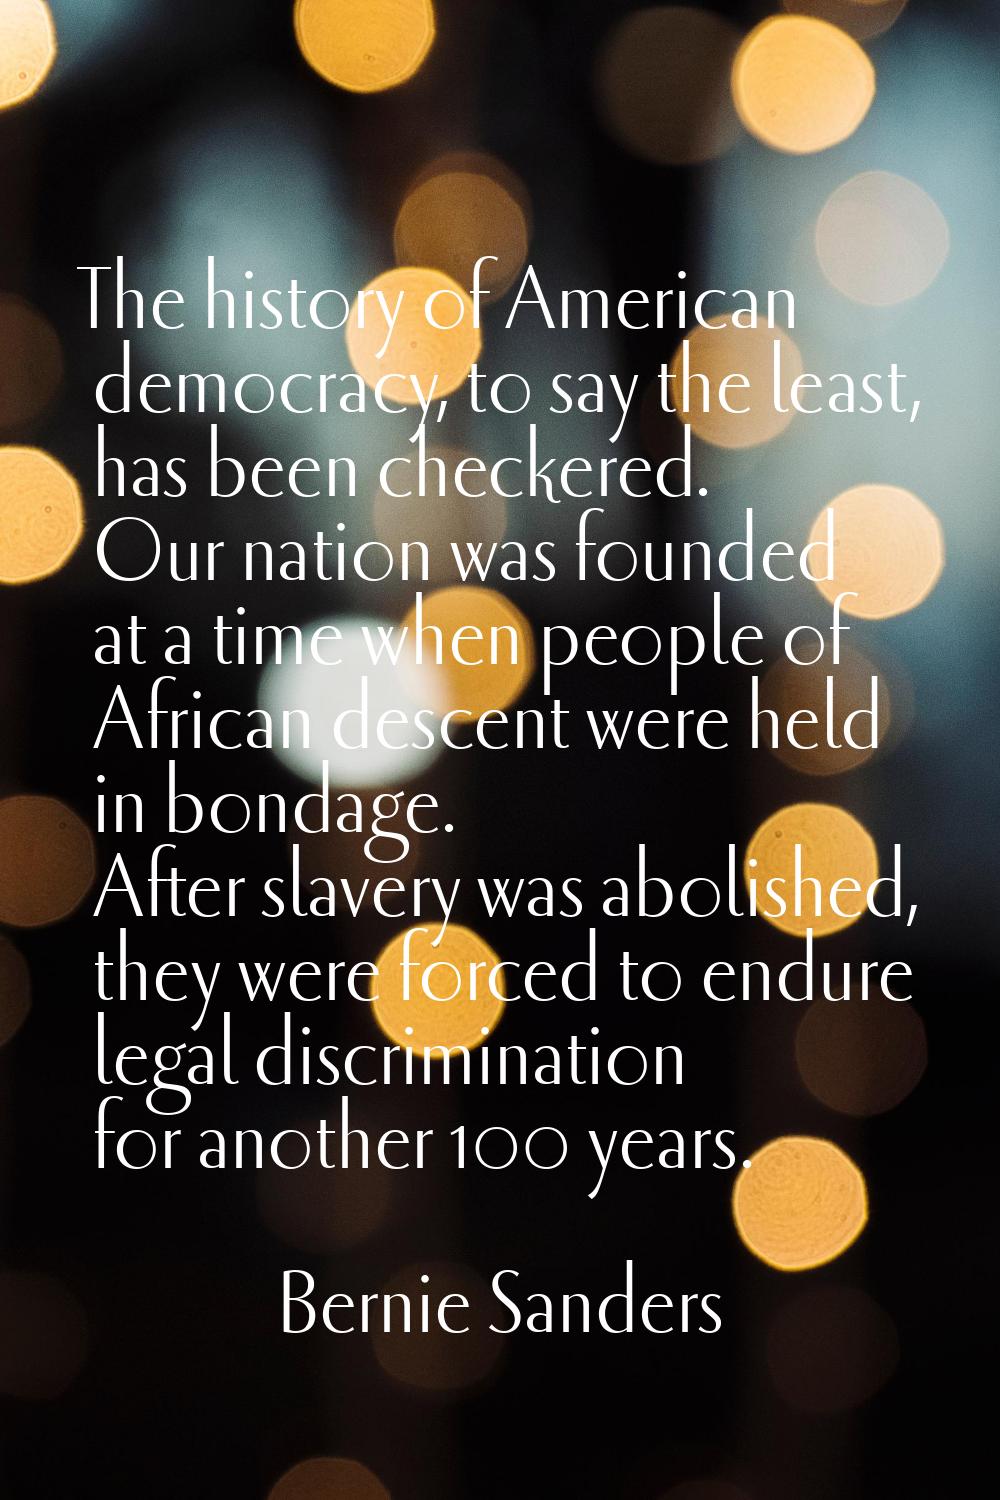 The history of American democracy, to say the least, has been checkered. Our nation was founded at 